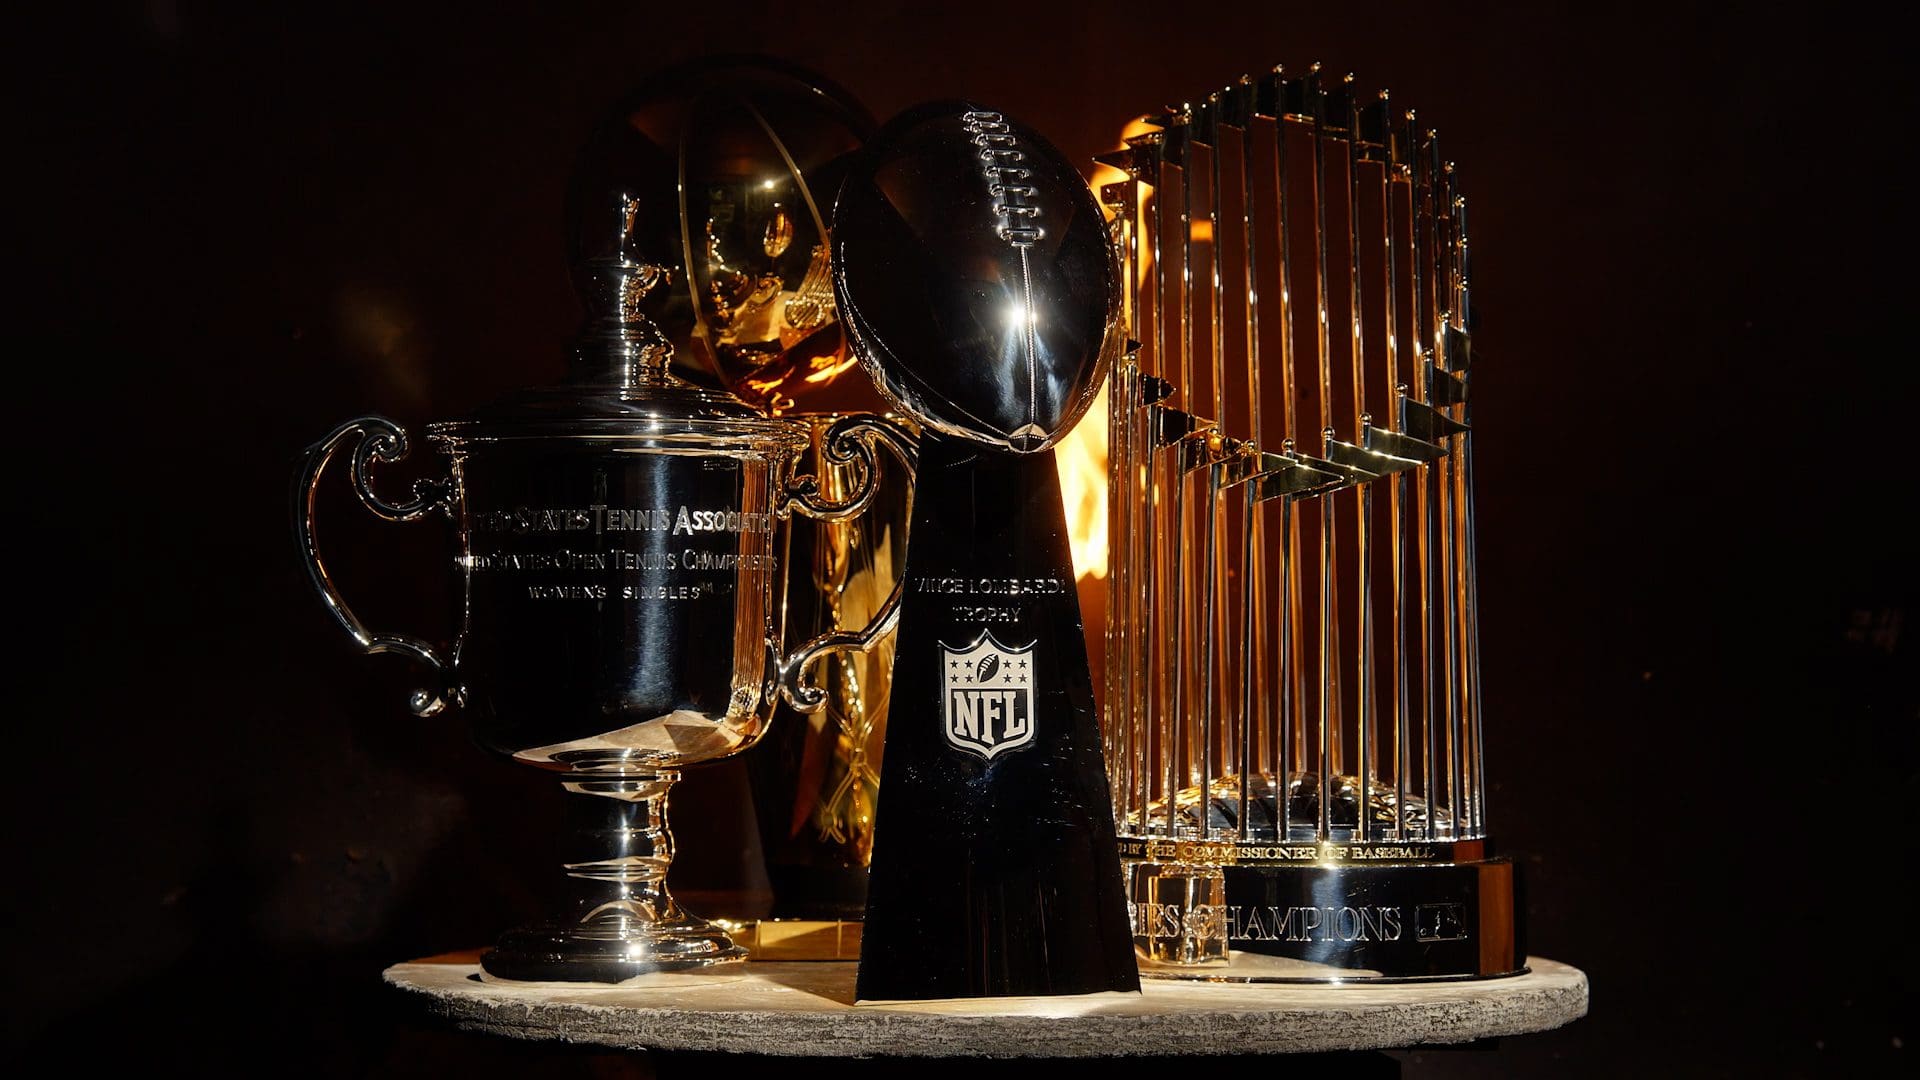 An array of prestigious sports trophies including the USTA Women's Singles trophy, the NFL's Vince Lombardi Trophy, and the MLB's Commissioner's Trophy, all crafted by Tiffany & Co., displayed against a dark background.